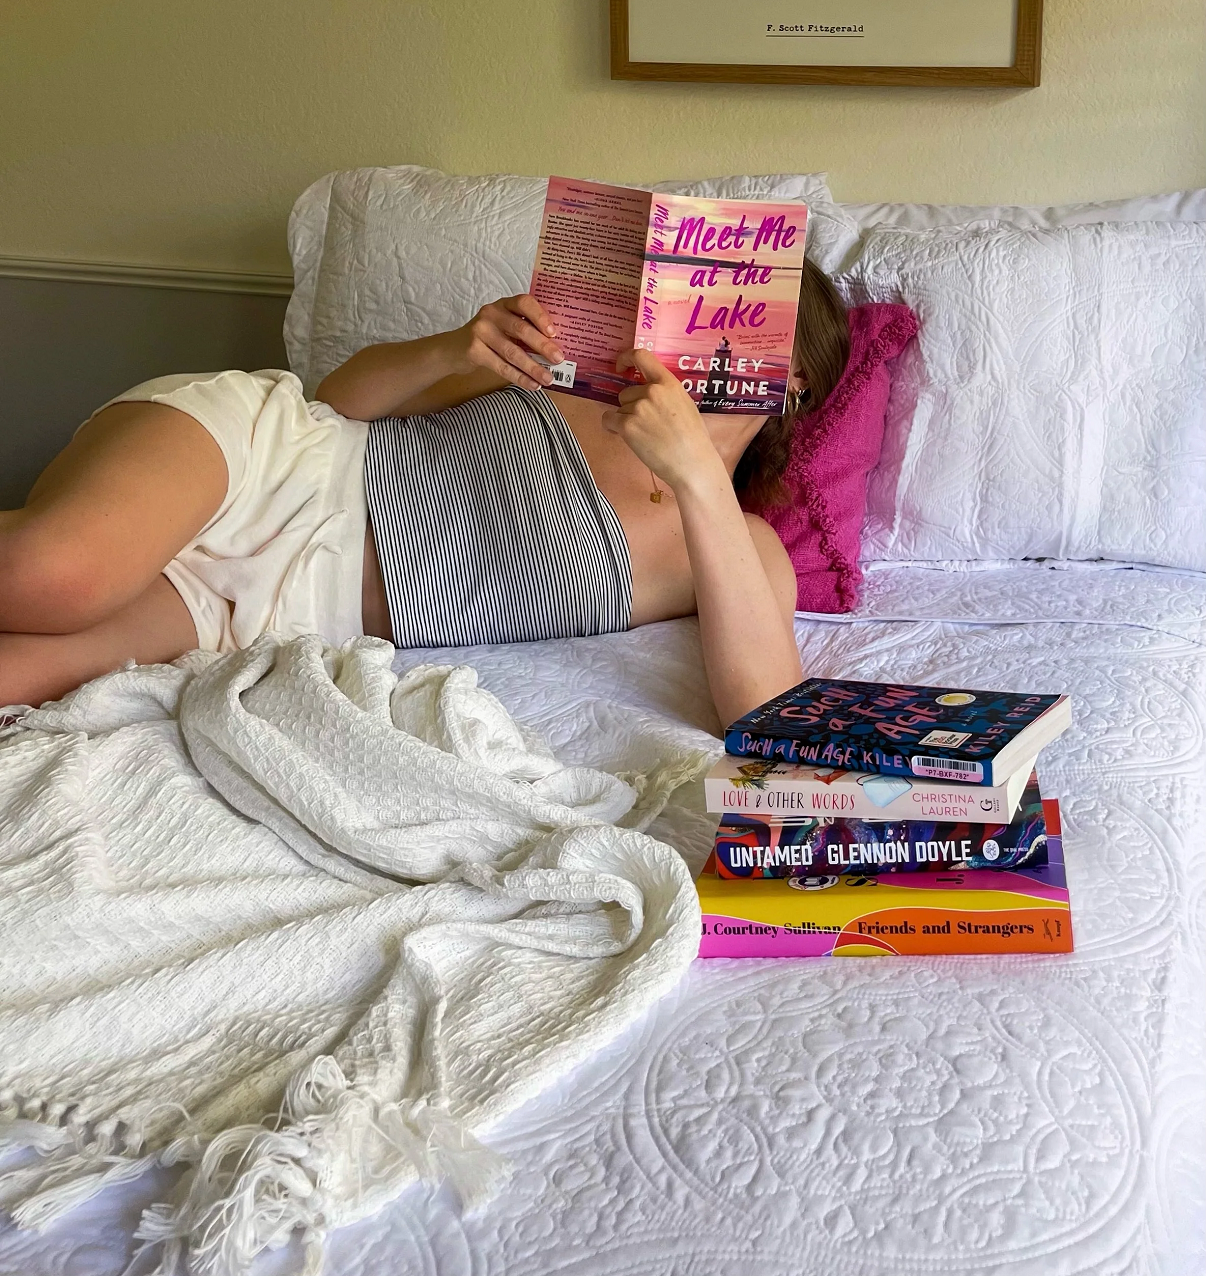 reading a book in bed